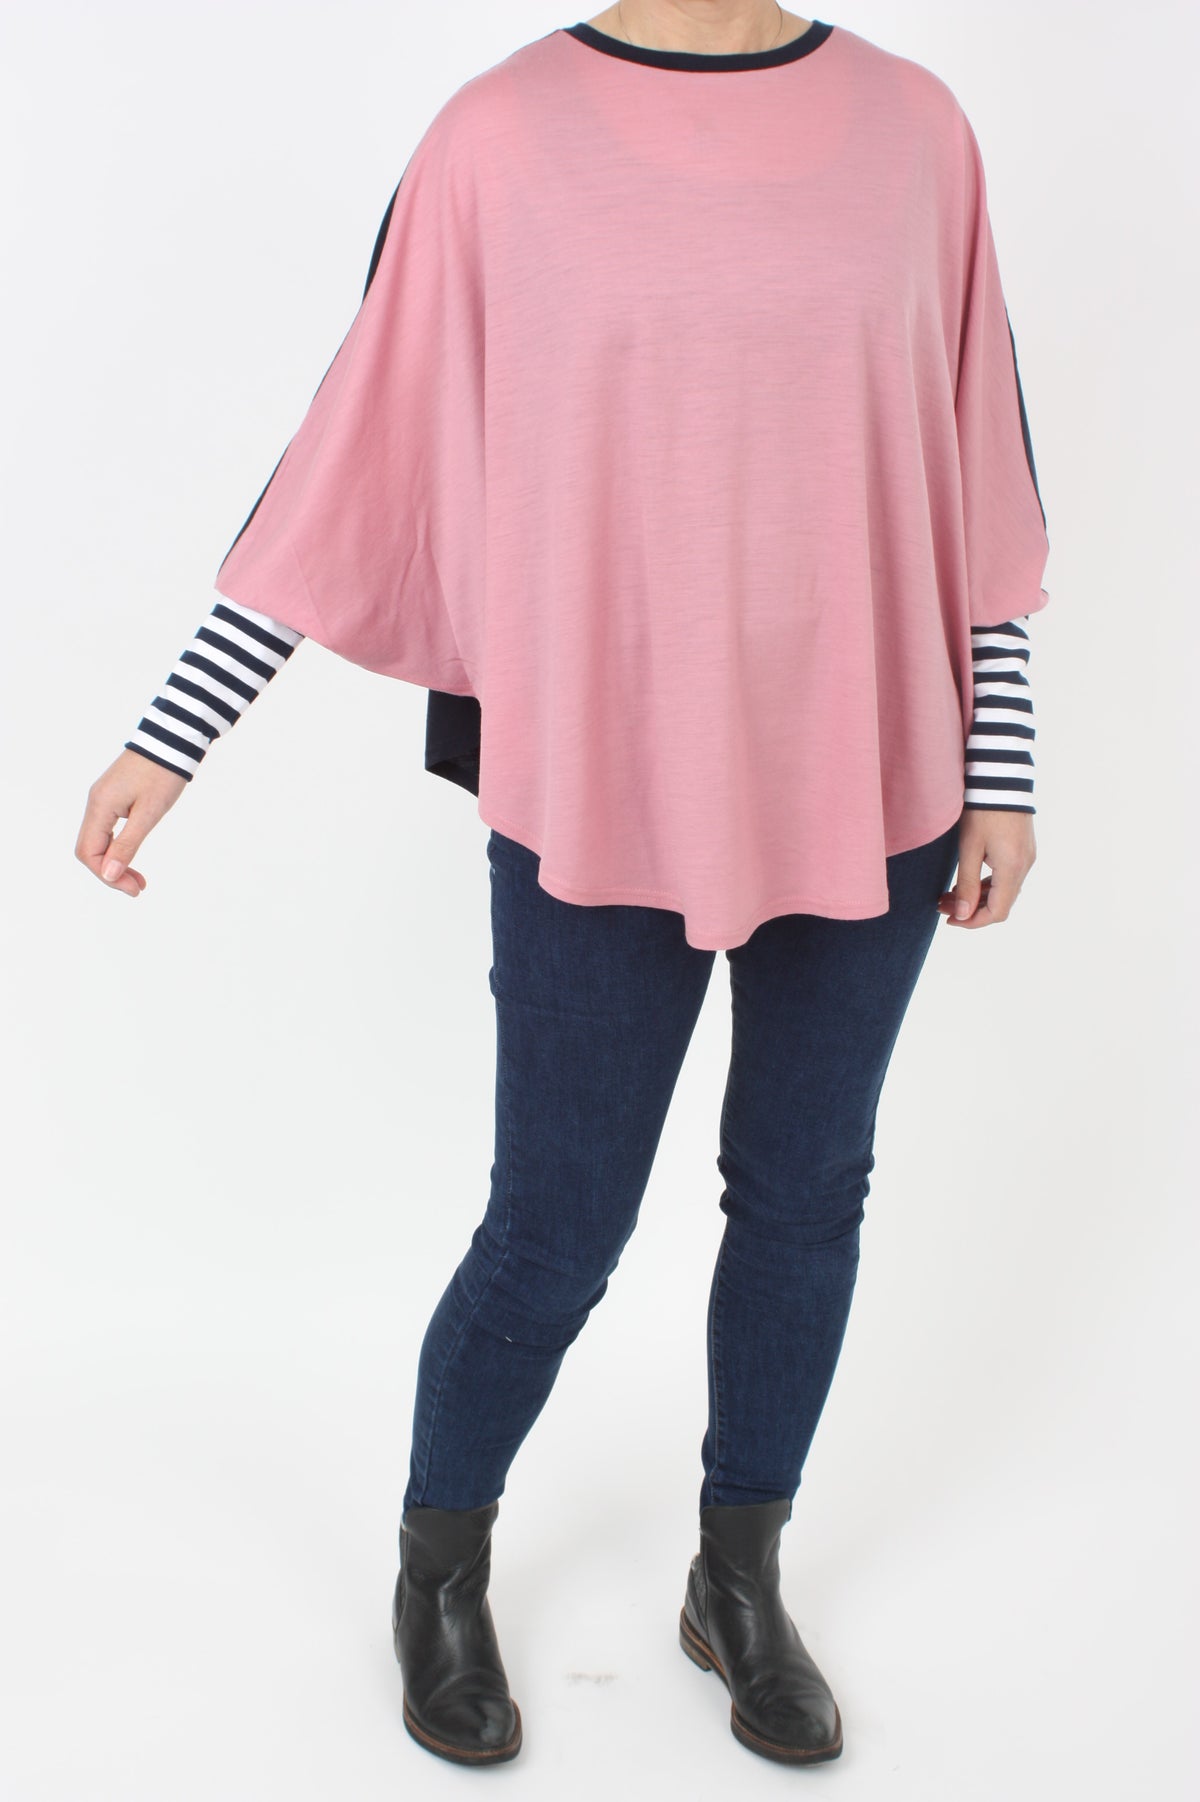 Poncho Merino Reversible - Navy and Pink with Navy and White stripe Cuff - Pre Order 2 - 3 Weeks